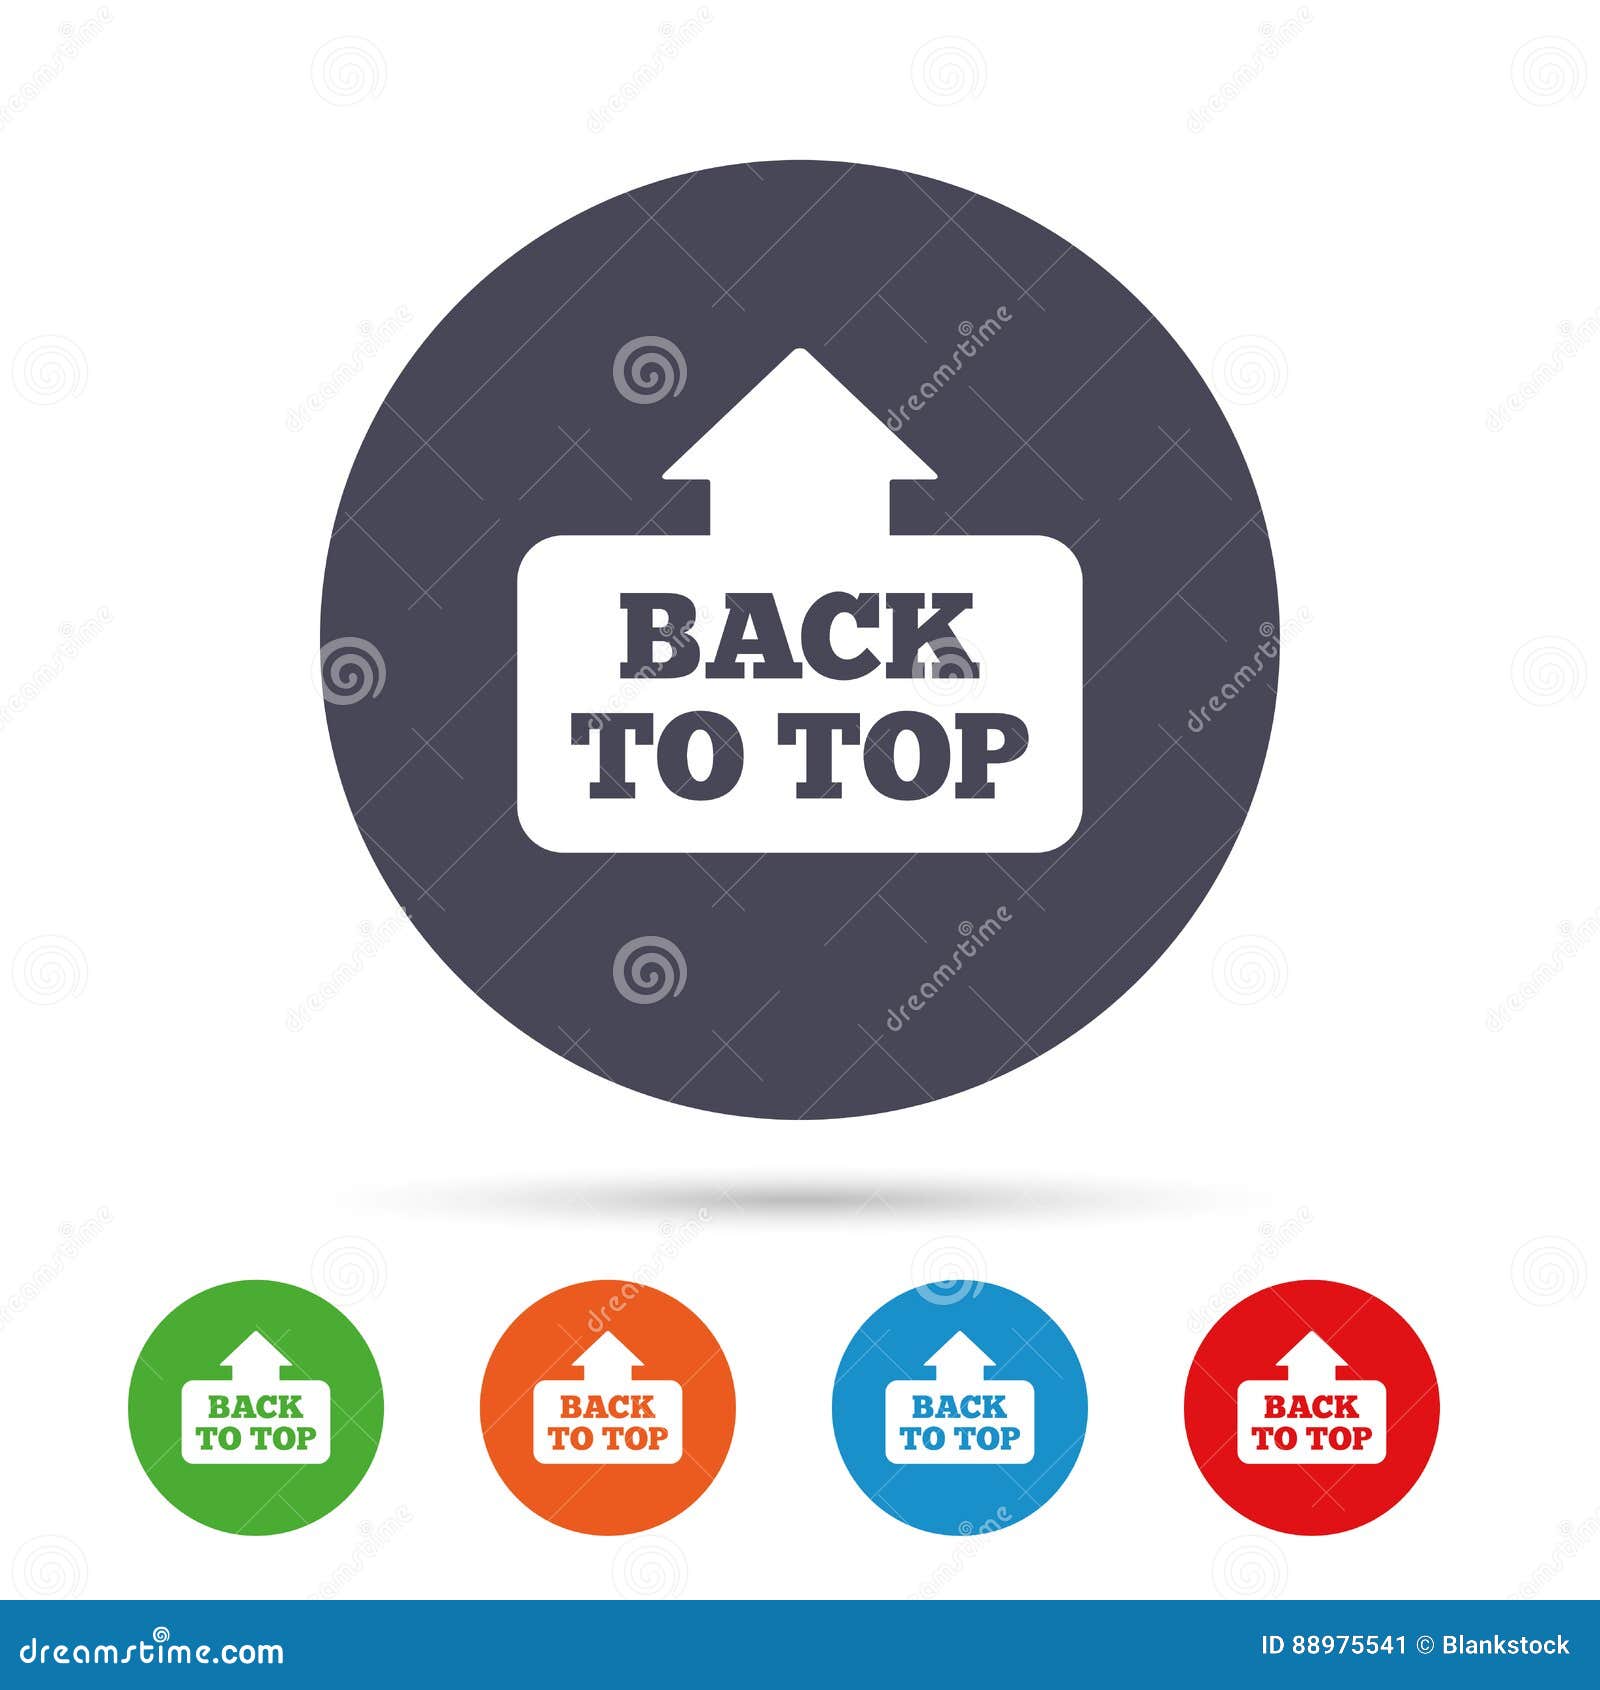 Back To Top Arrow Sign Icon. Up Symbol. Stock Vector - Illustration of internet, 88975541